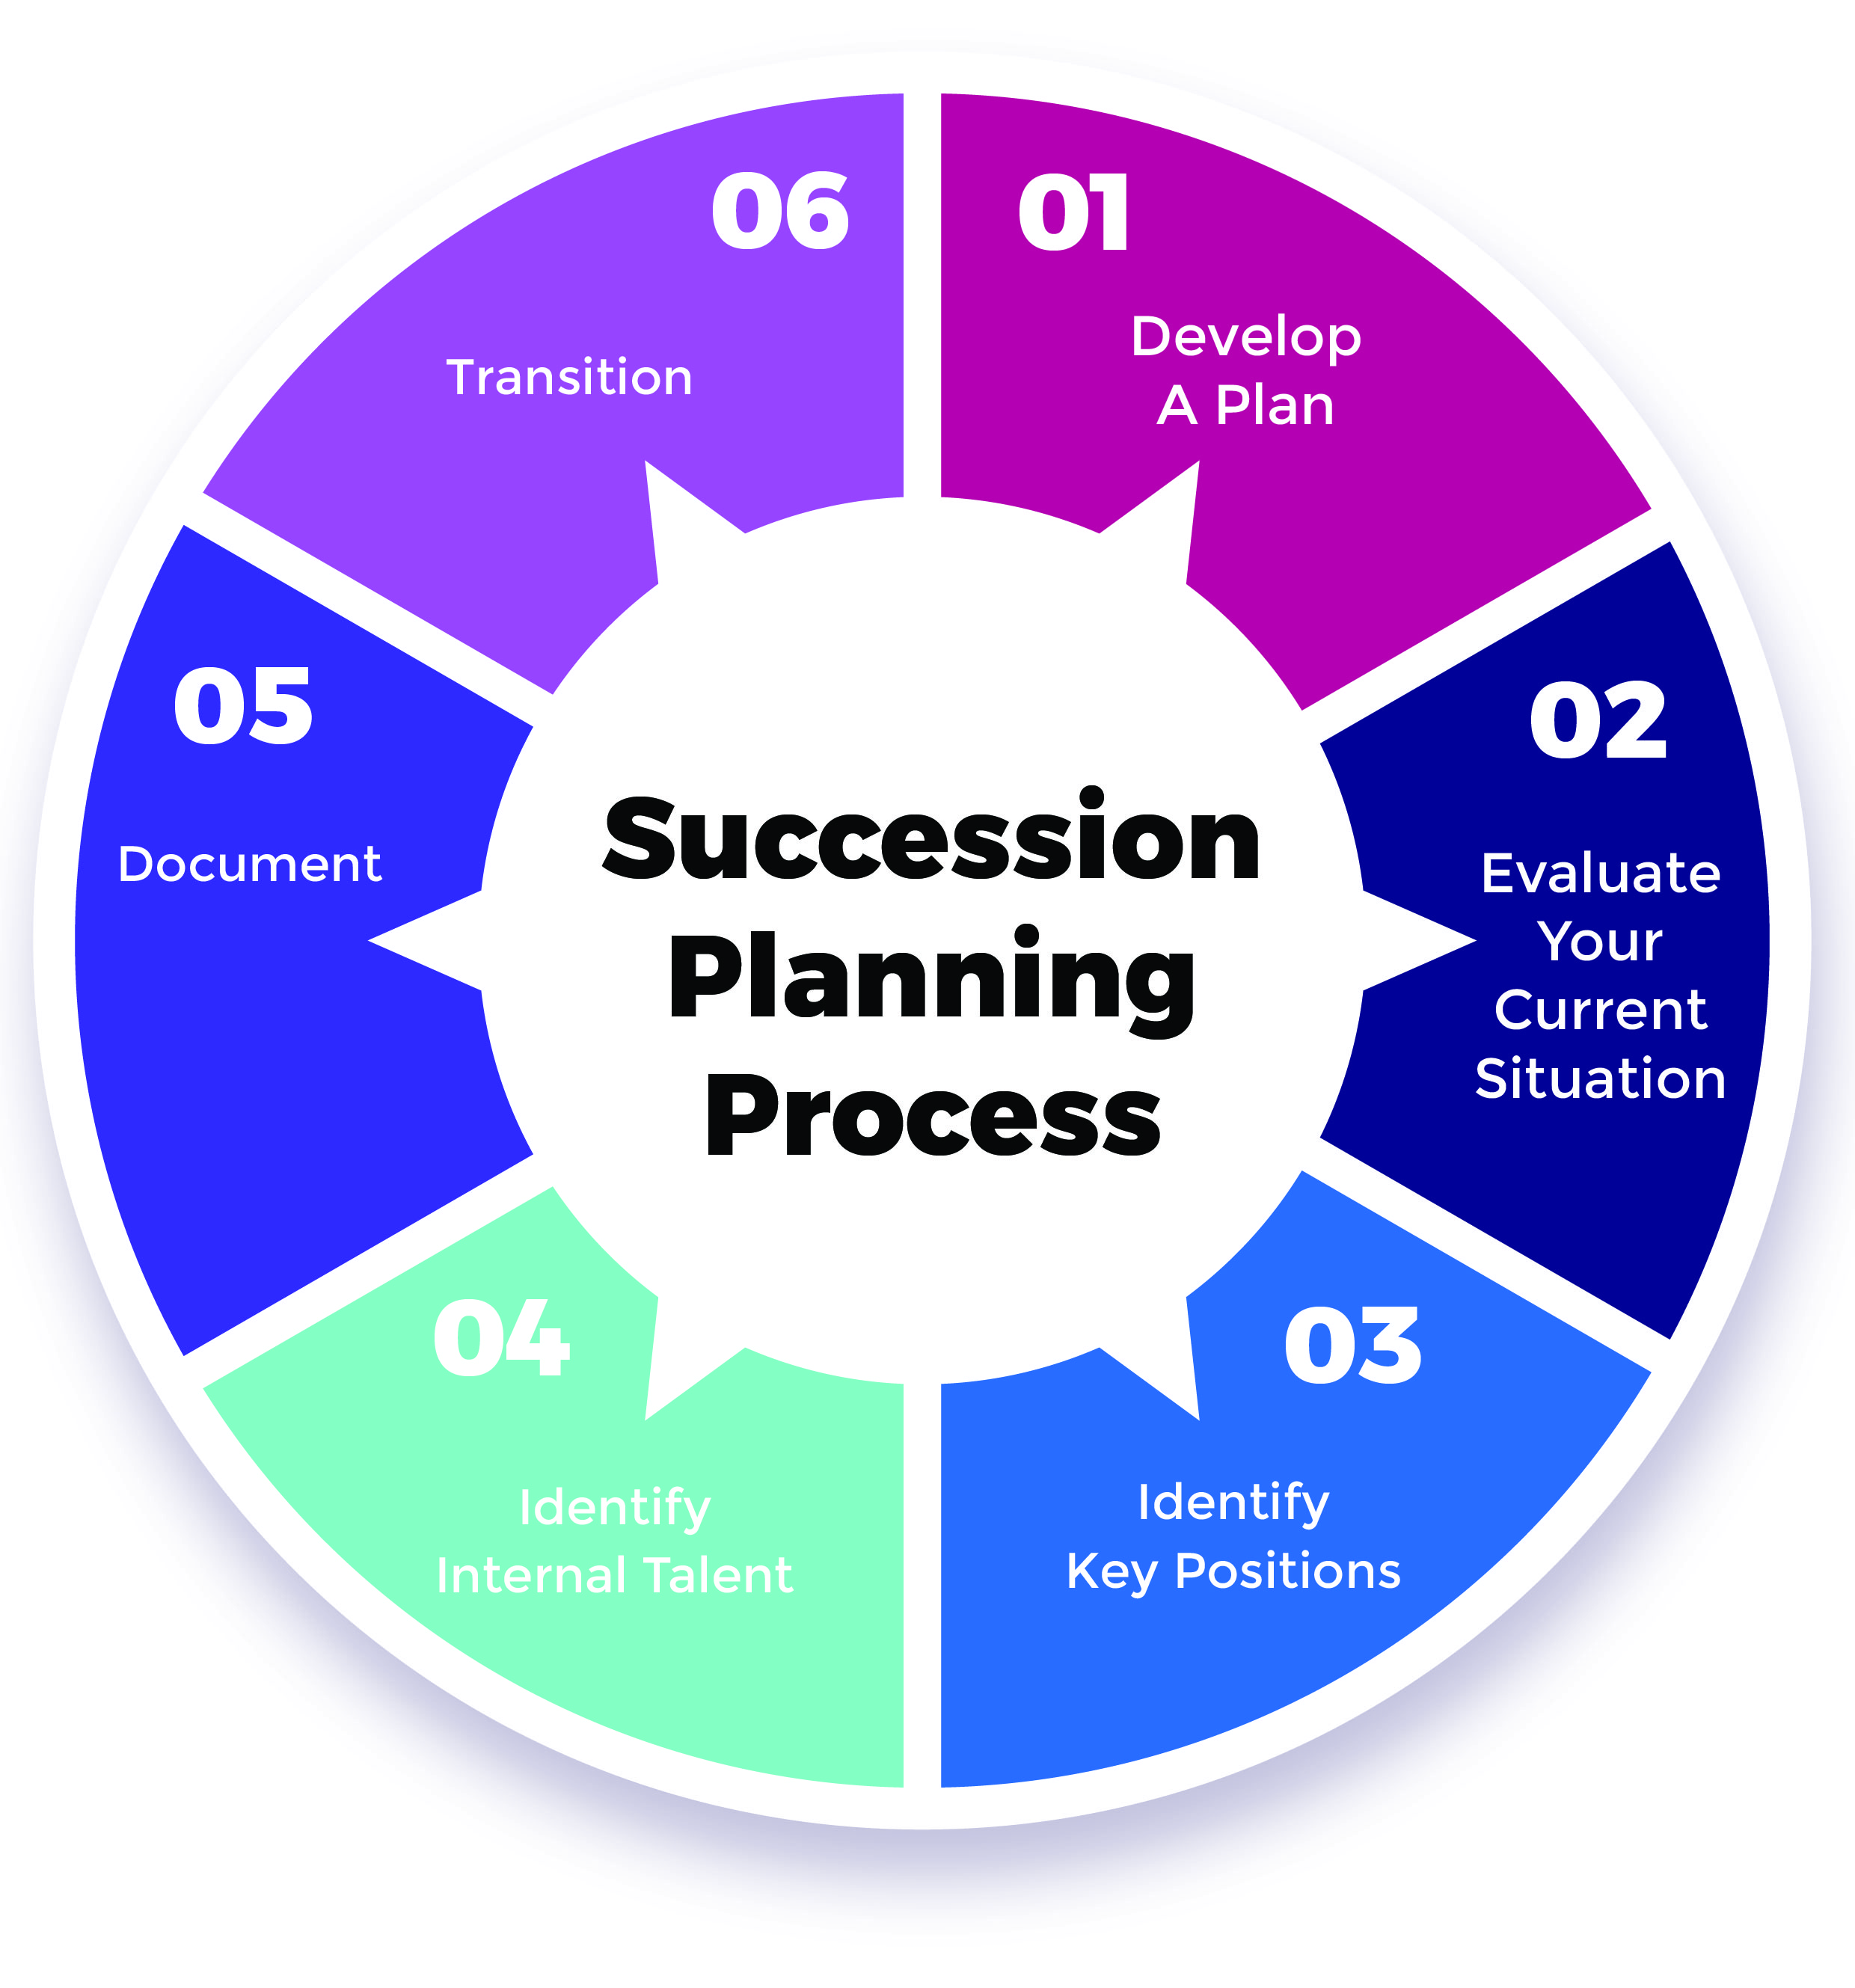 Professional and Organizational Development in Succession Planning ...